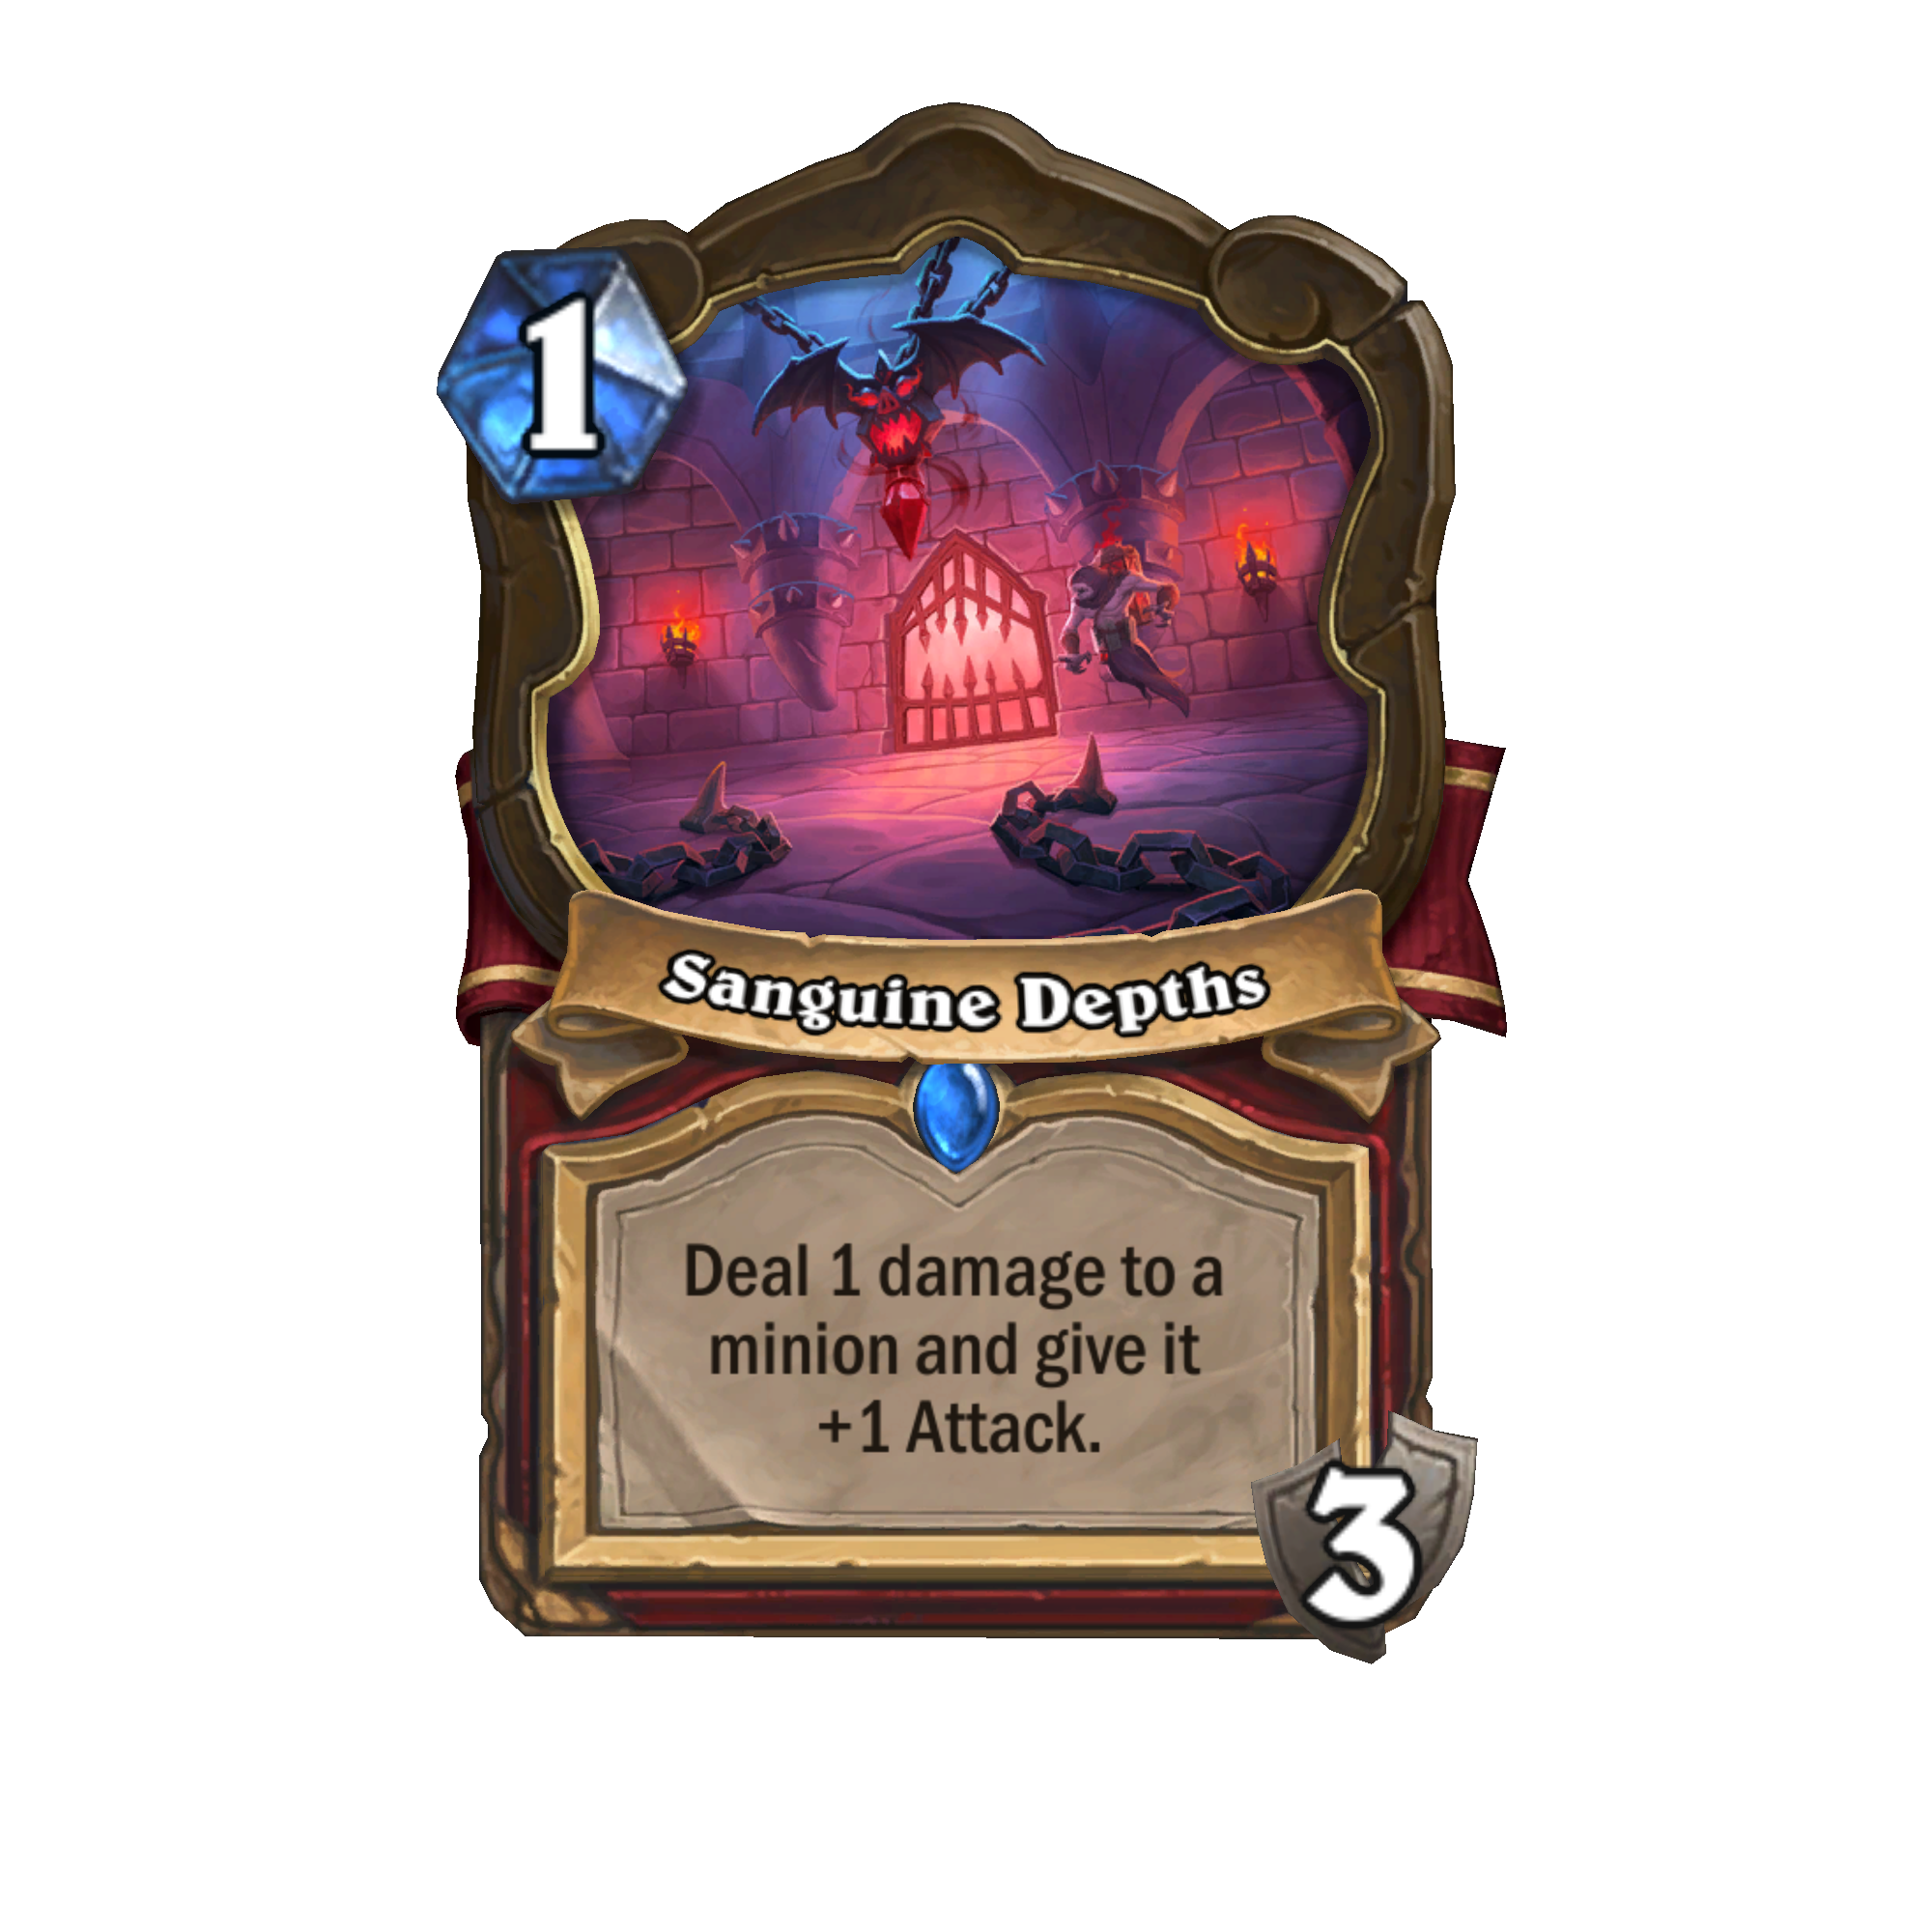 One of the new location cards: Sanguine Depths